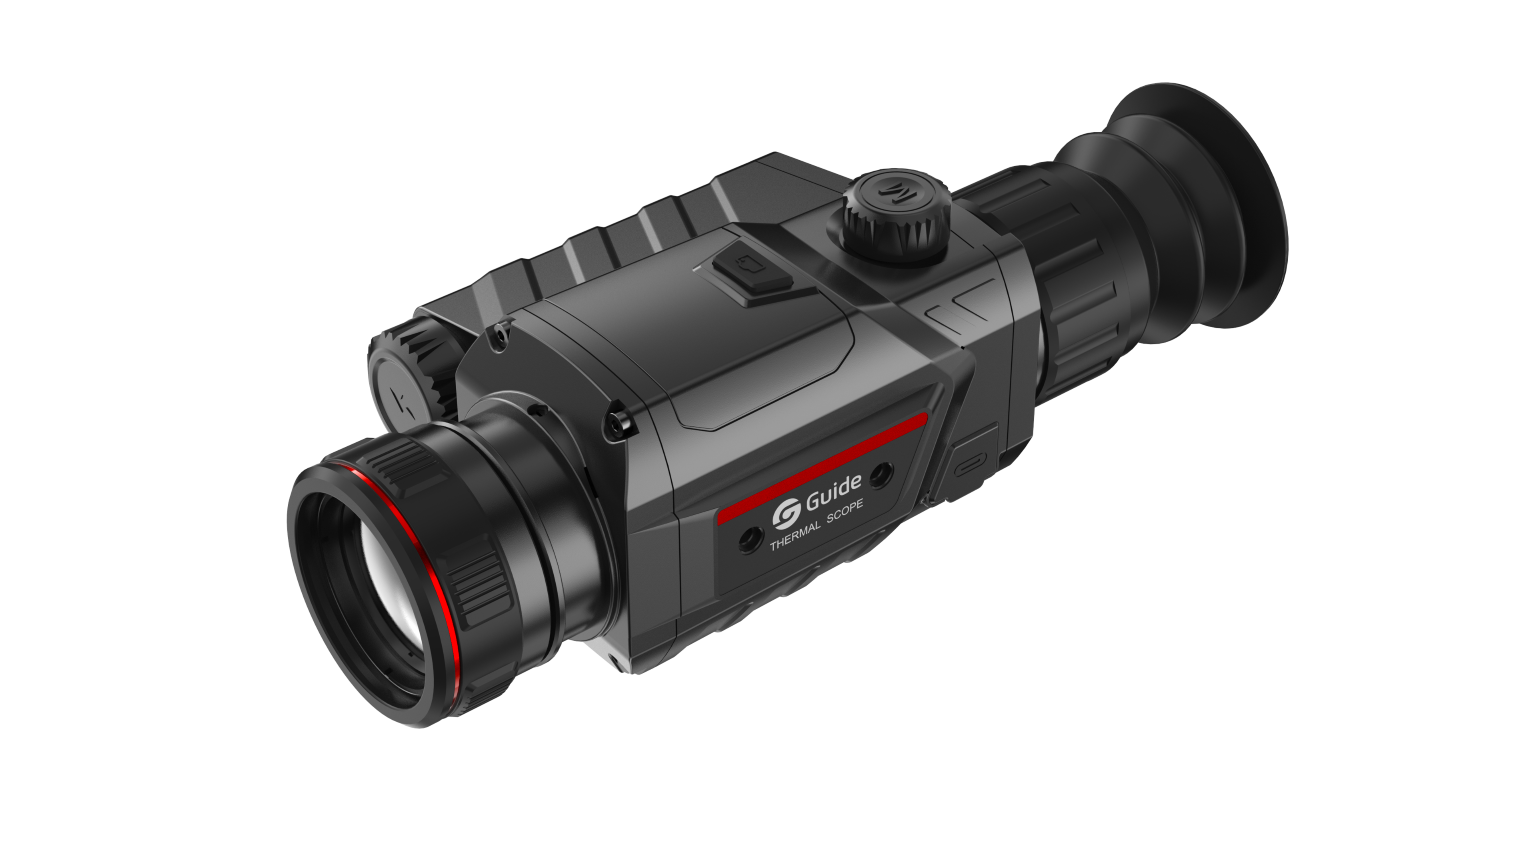 Guide Sensmart TR 650 - Thermal Riflescopes - Guide Thermal USA